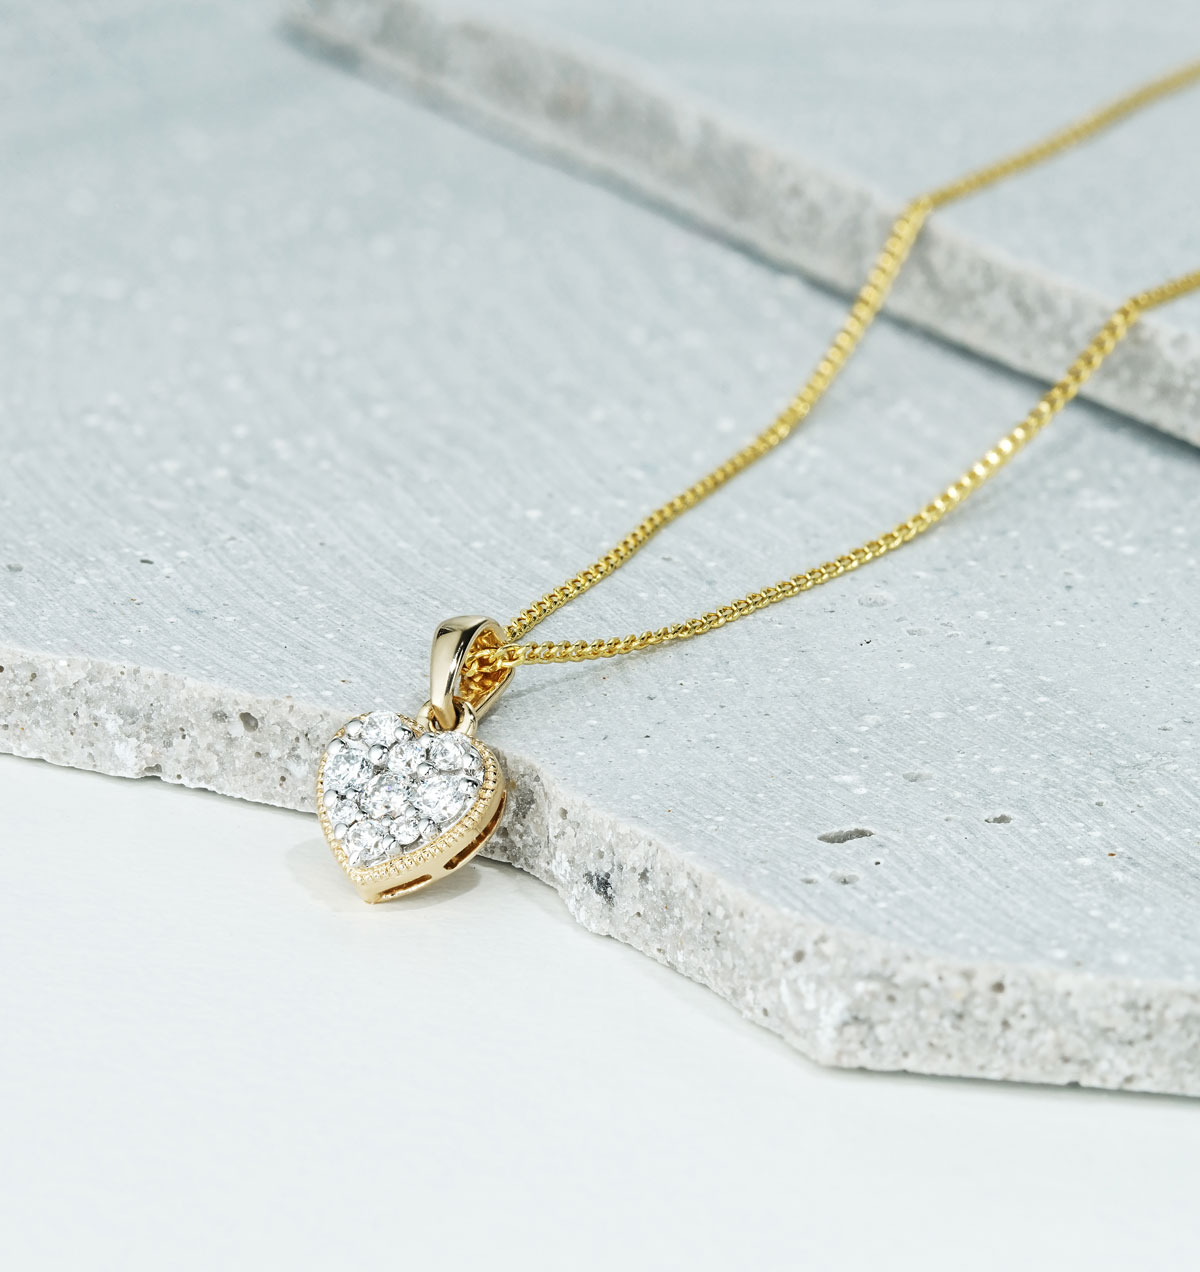 Lab Diamond Heart Pendant Necklace 0.25ct H/Si in 9K Gold